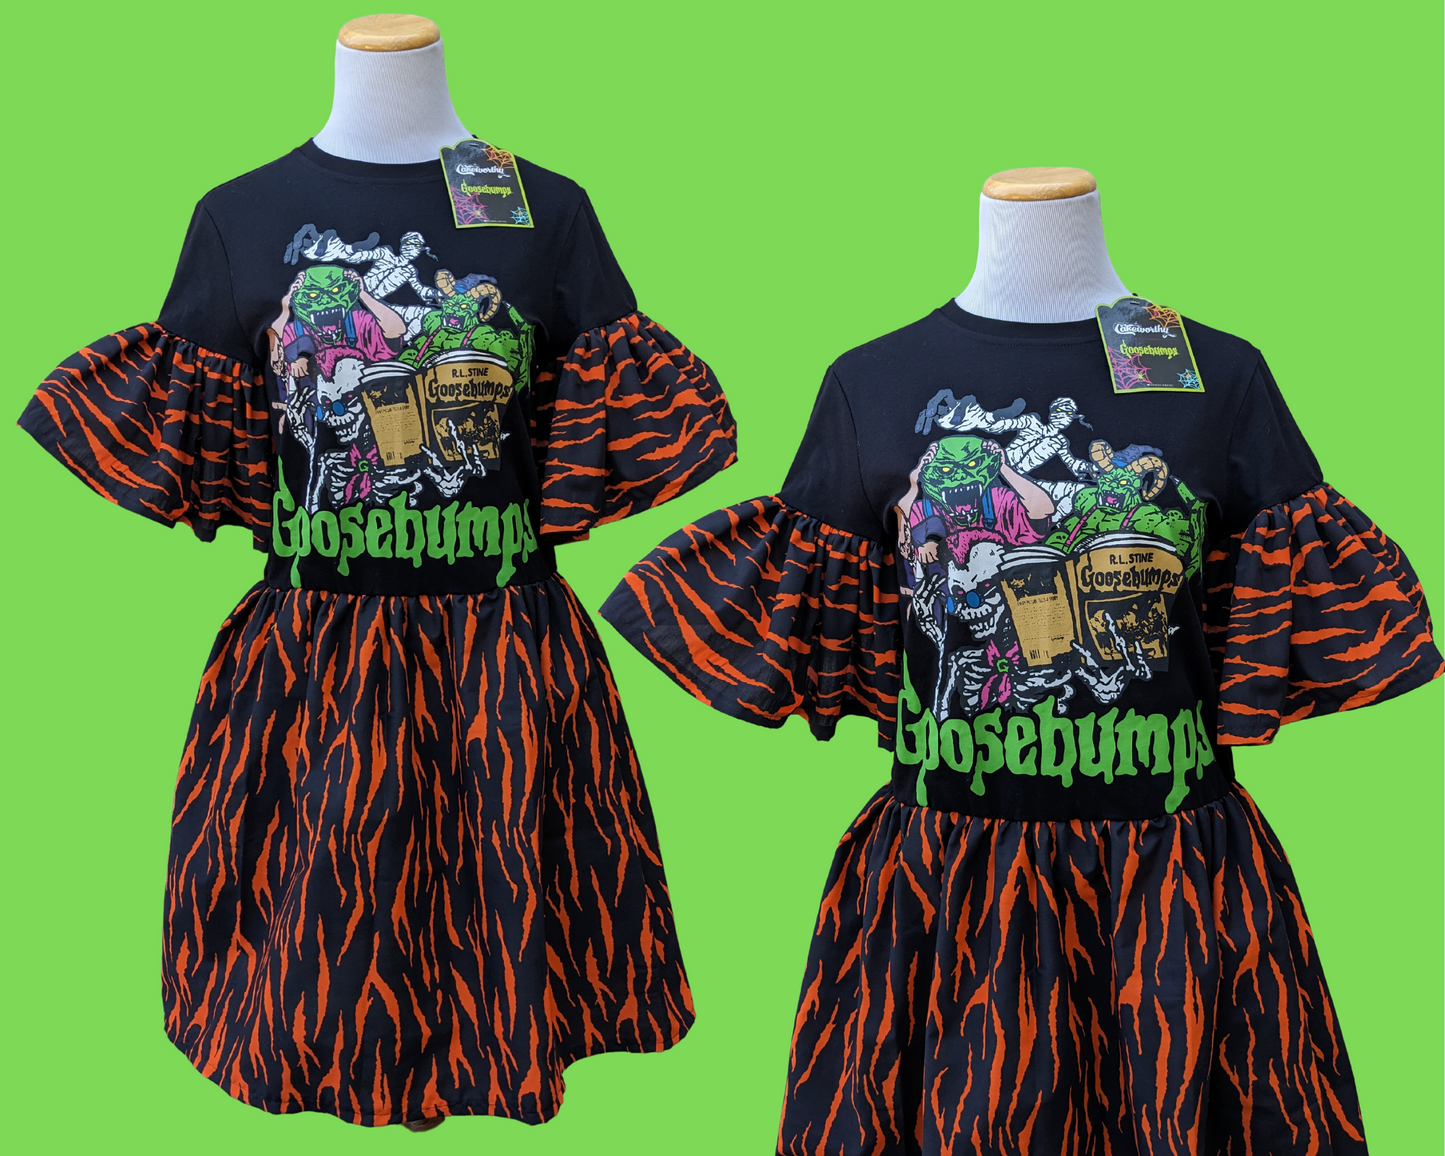 Handmade, Upcycled Goosebumps T-Shirt Dress from Cakeworthy (Brand New) with Orange and Black Fabric Size S